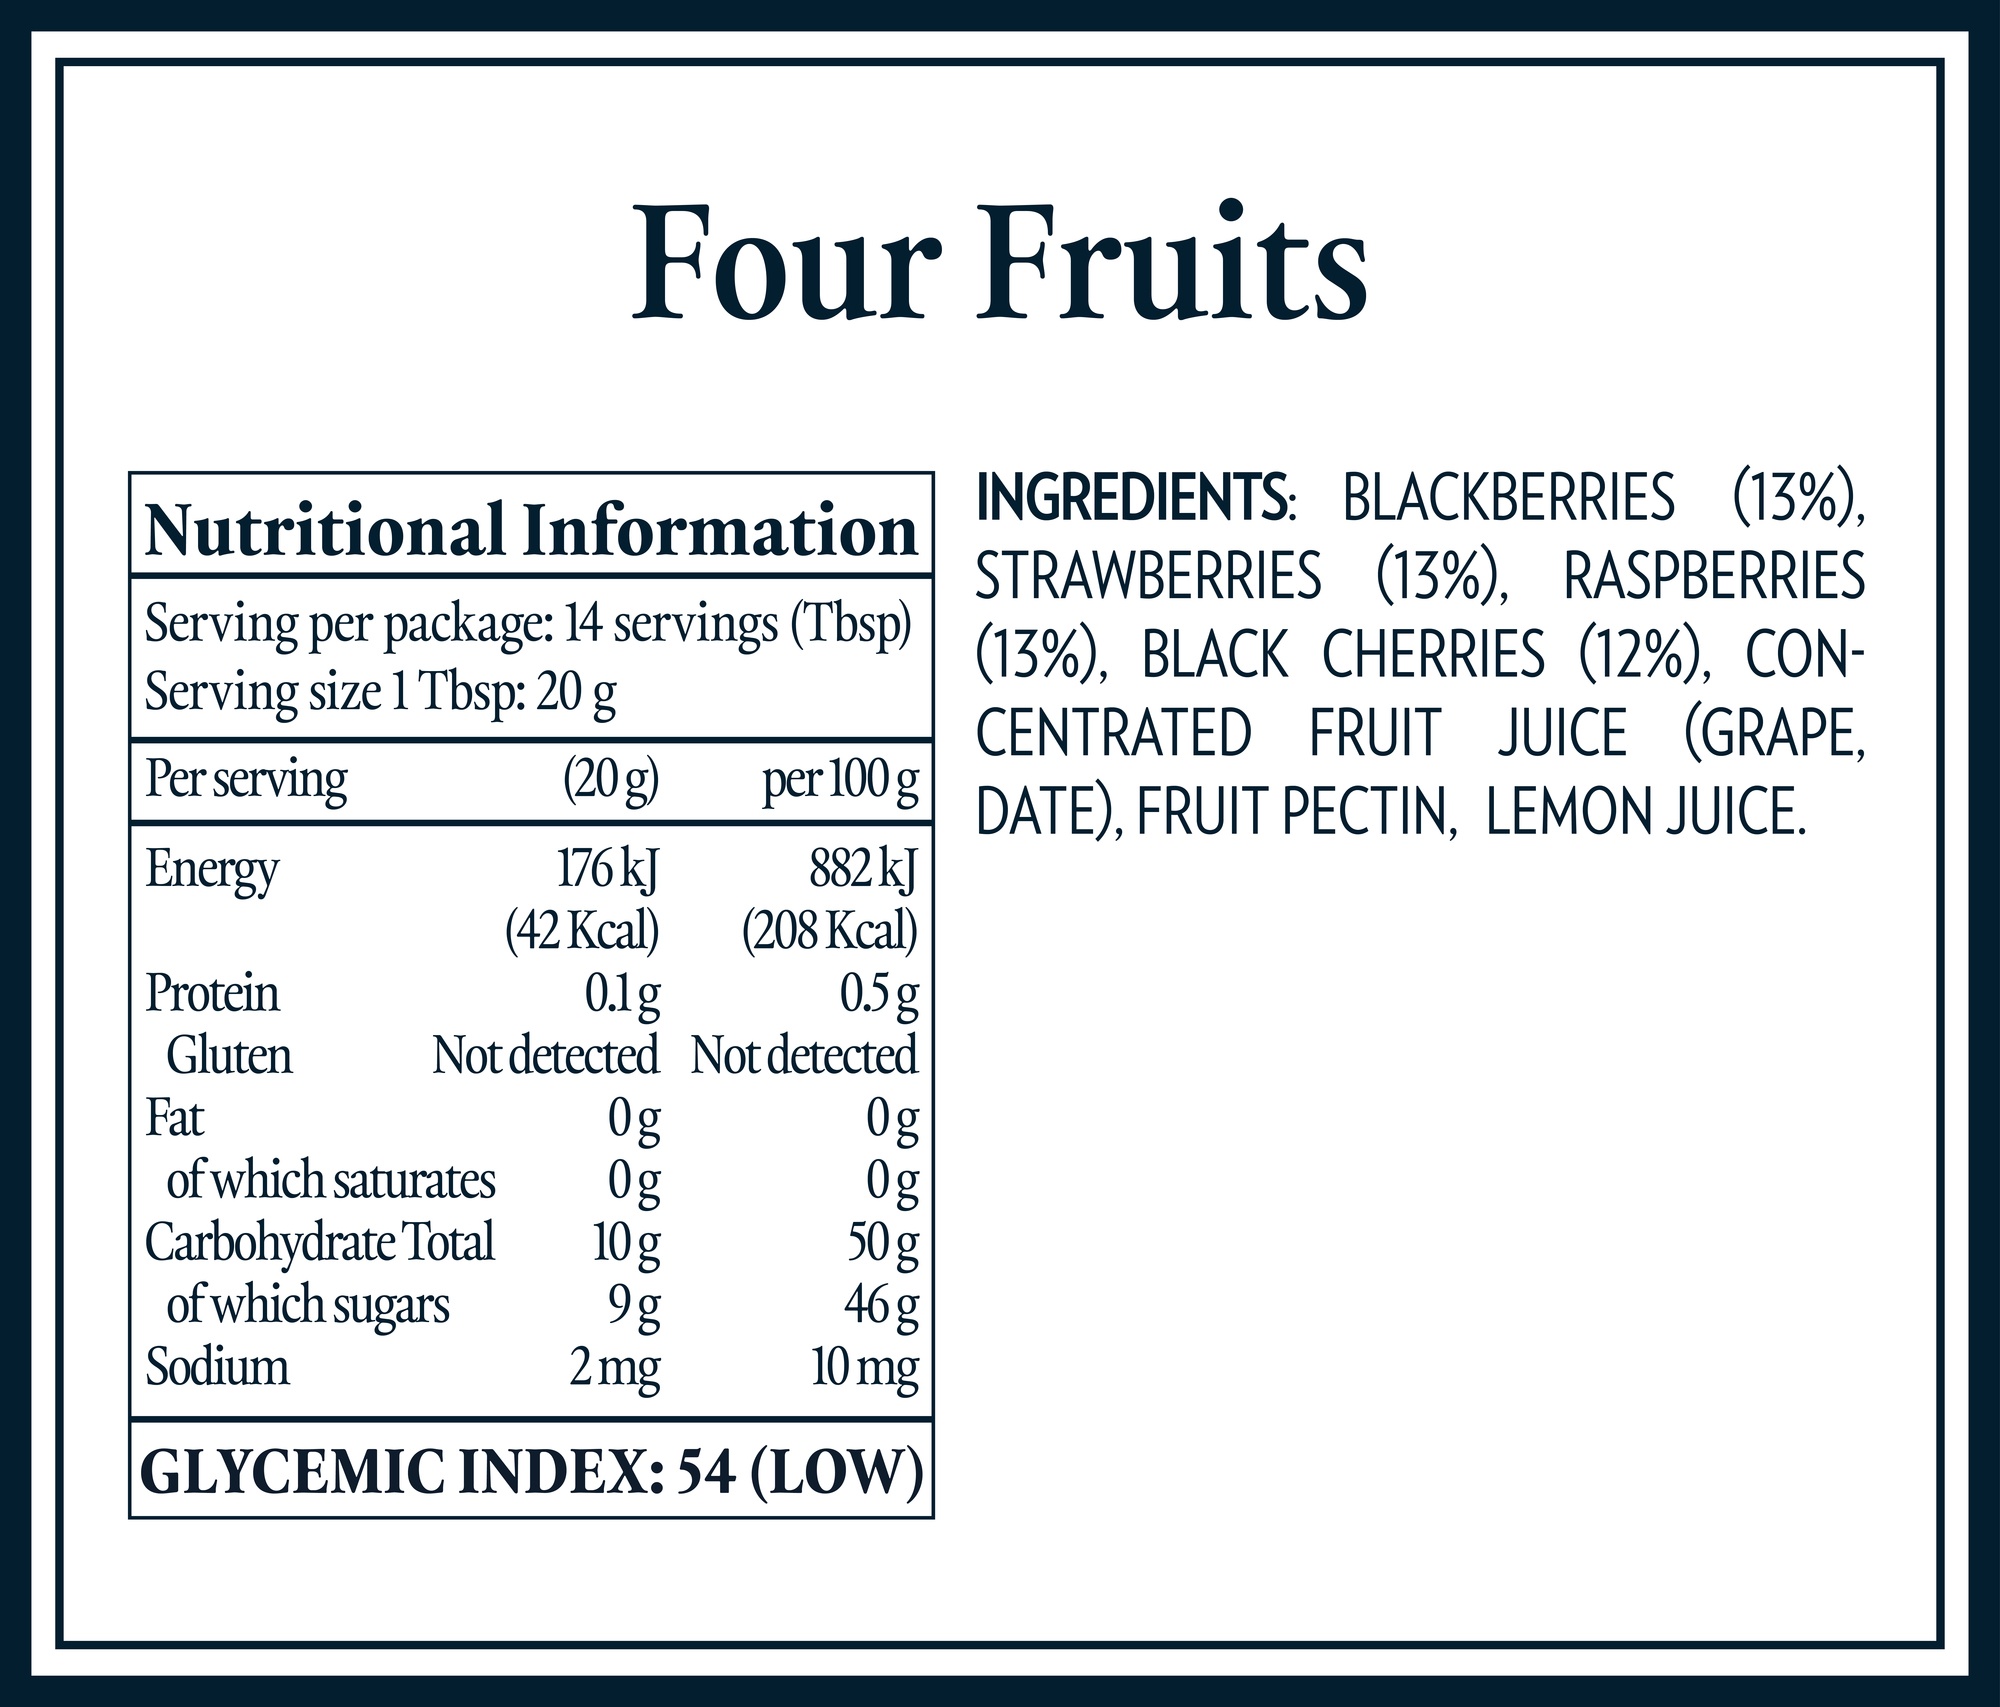 Nutrition Tables & Ingredients_AUS_four fruits